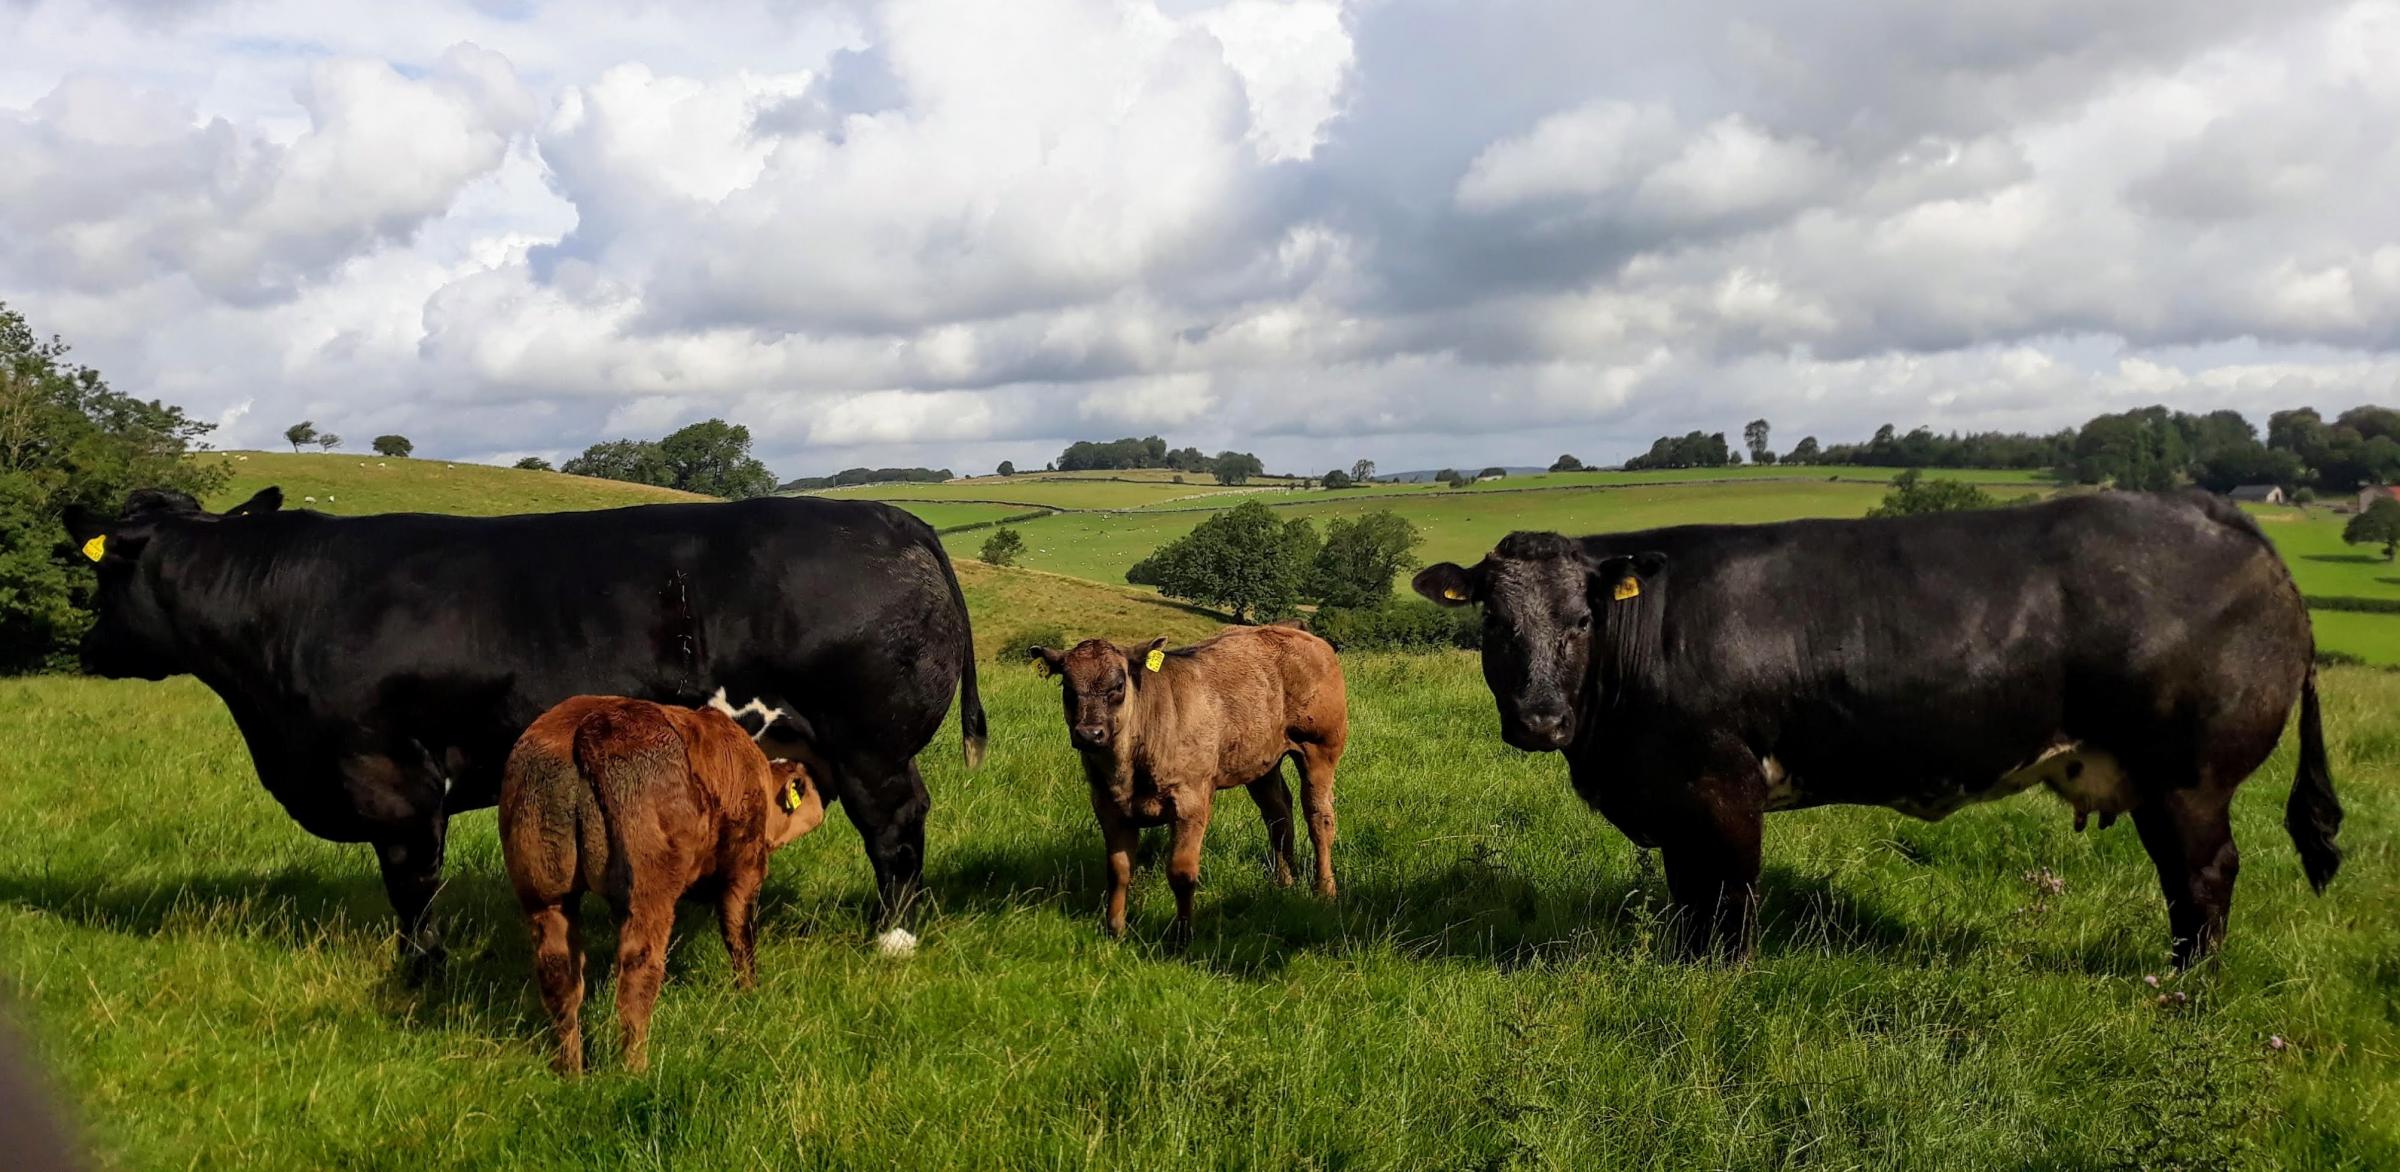 Typical quality Blue and Limousin cross females the Sedgleys aim to breed from enjoying last years summer grass